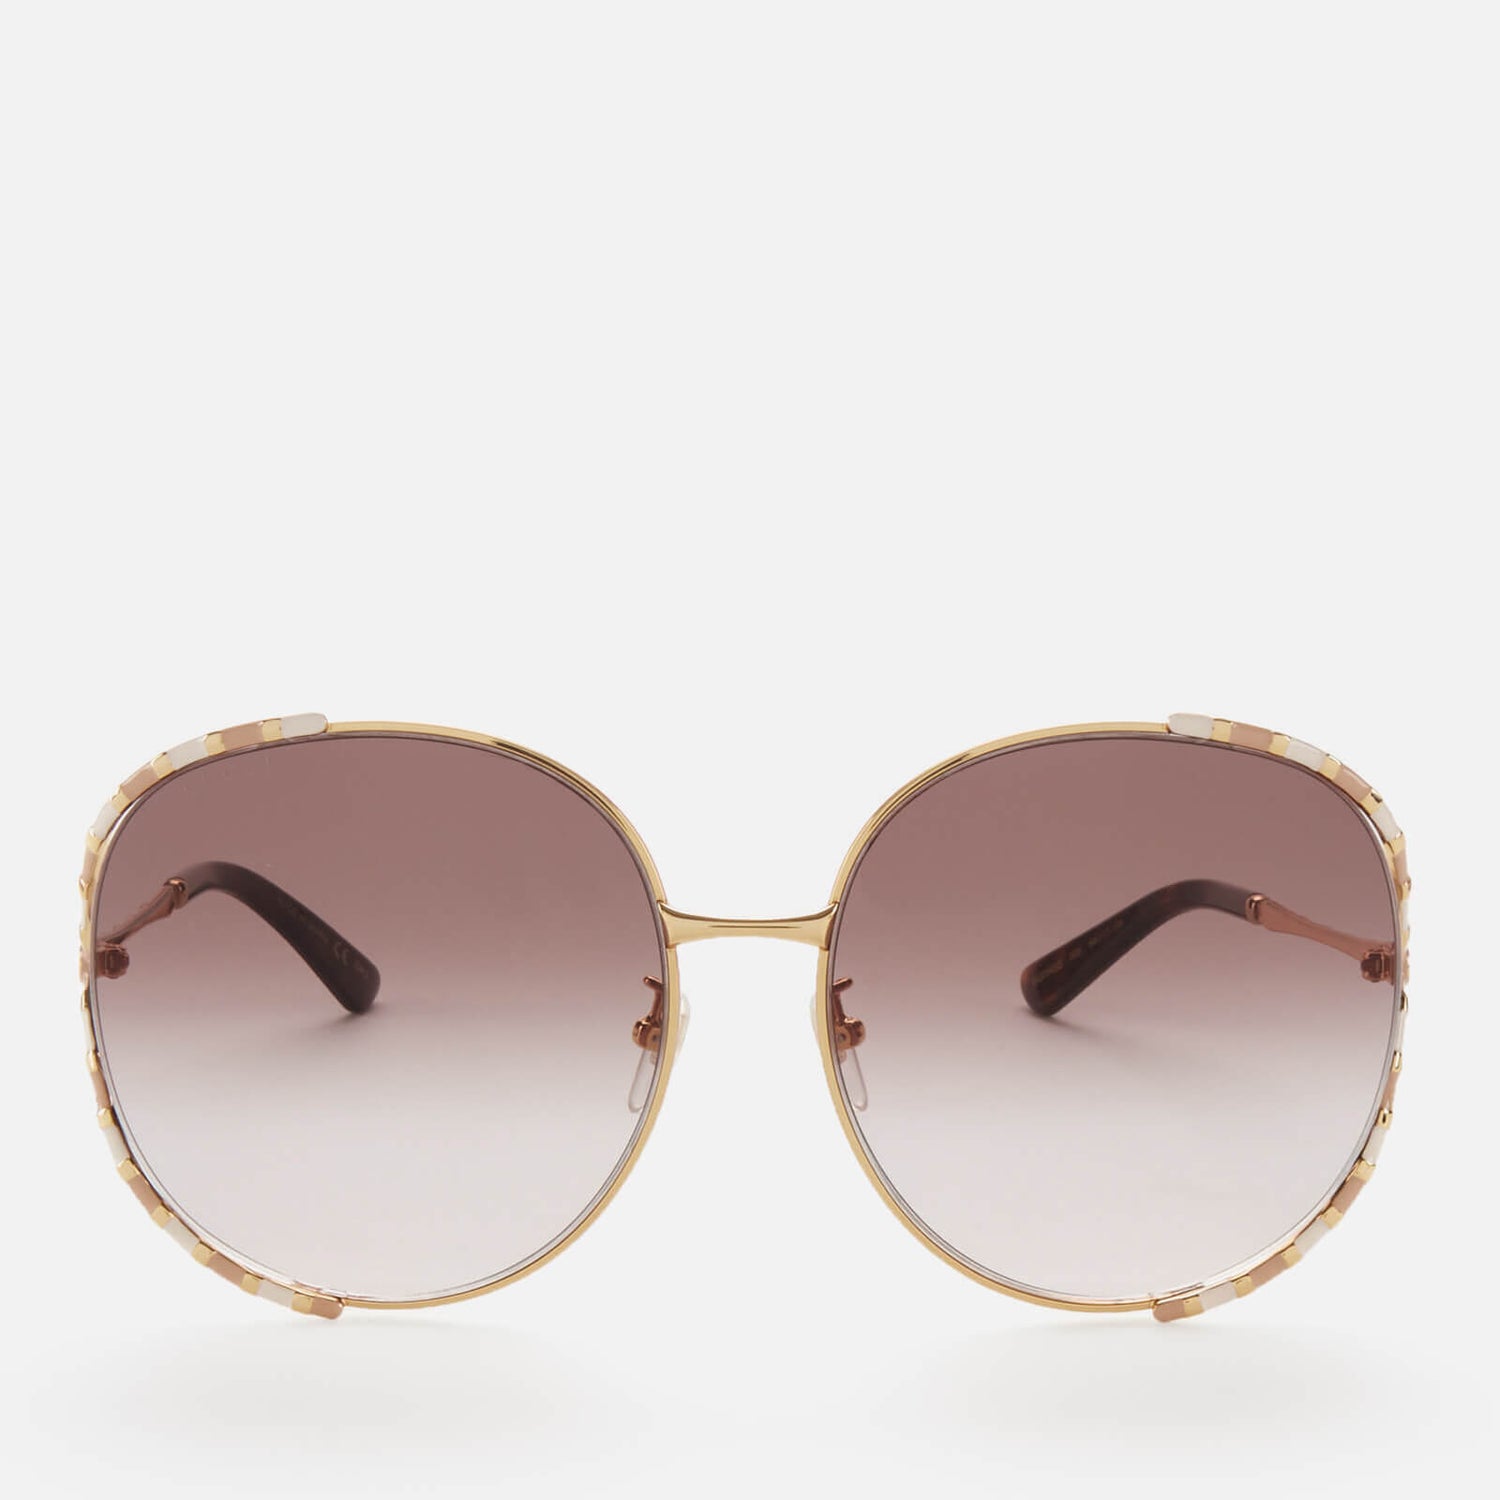 Gucci Women's Oversizsed Metal Frame Sunglasses - Gold/Brown